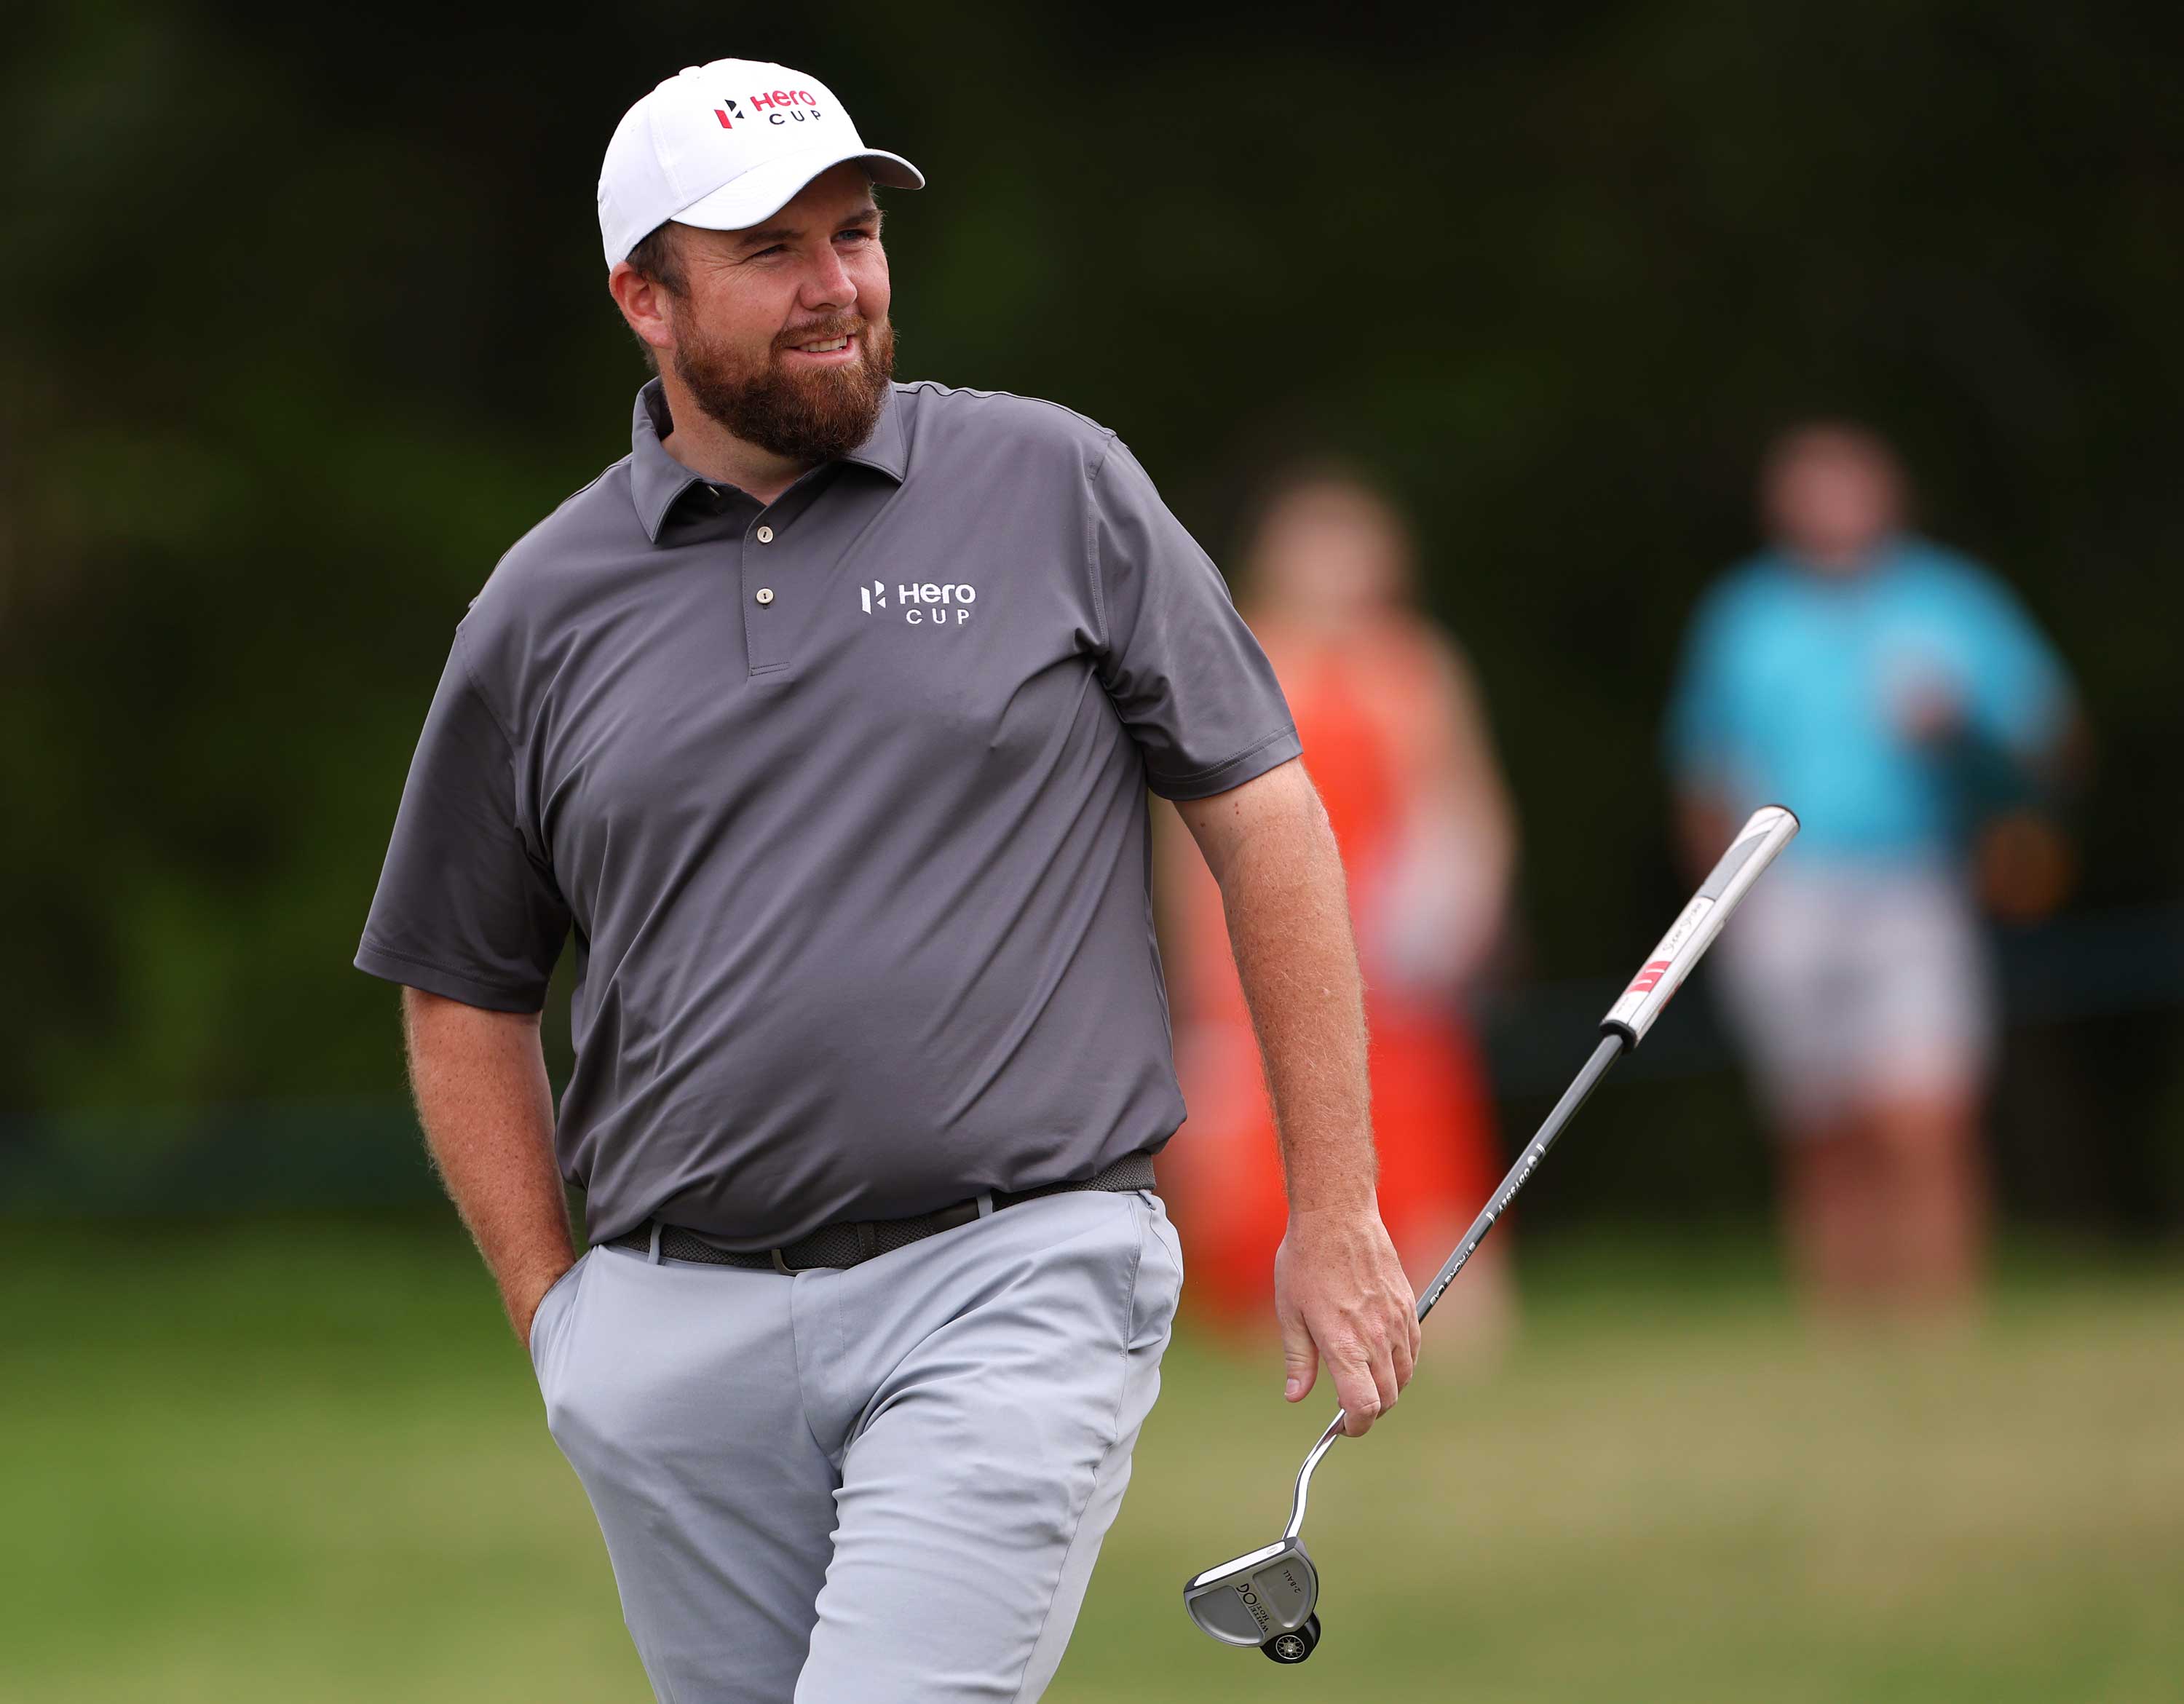 Shane Lowry Tames Bay Hill for First-Round Lead